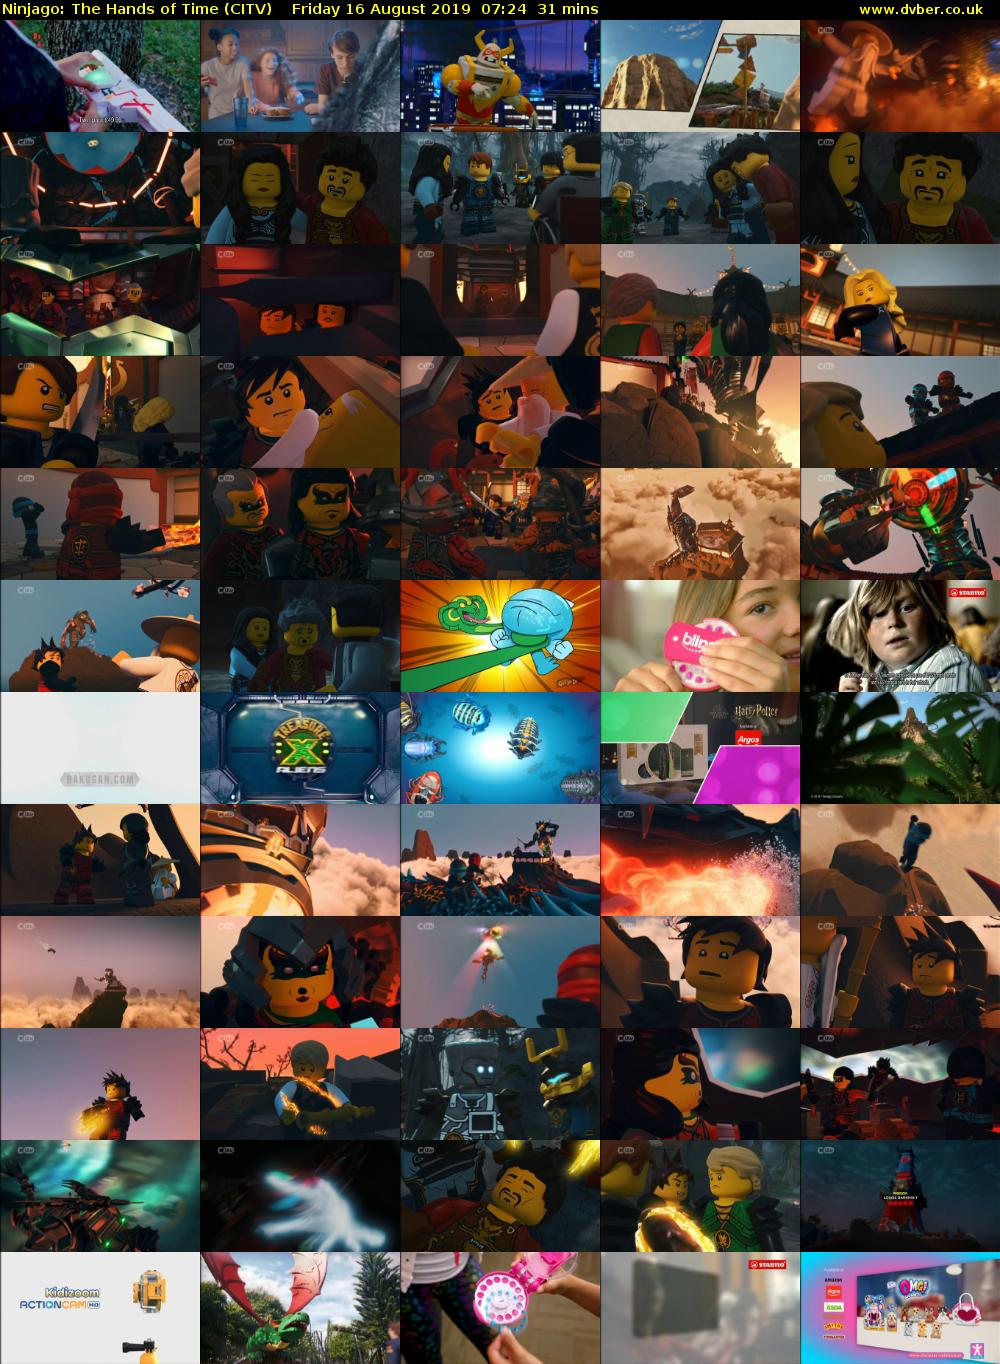 Ninjago: The Hands of Time (CITV) Friday 16 August 2019 07:24 - 07:55